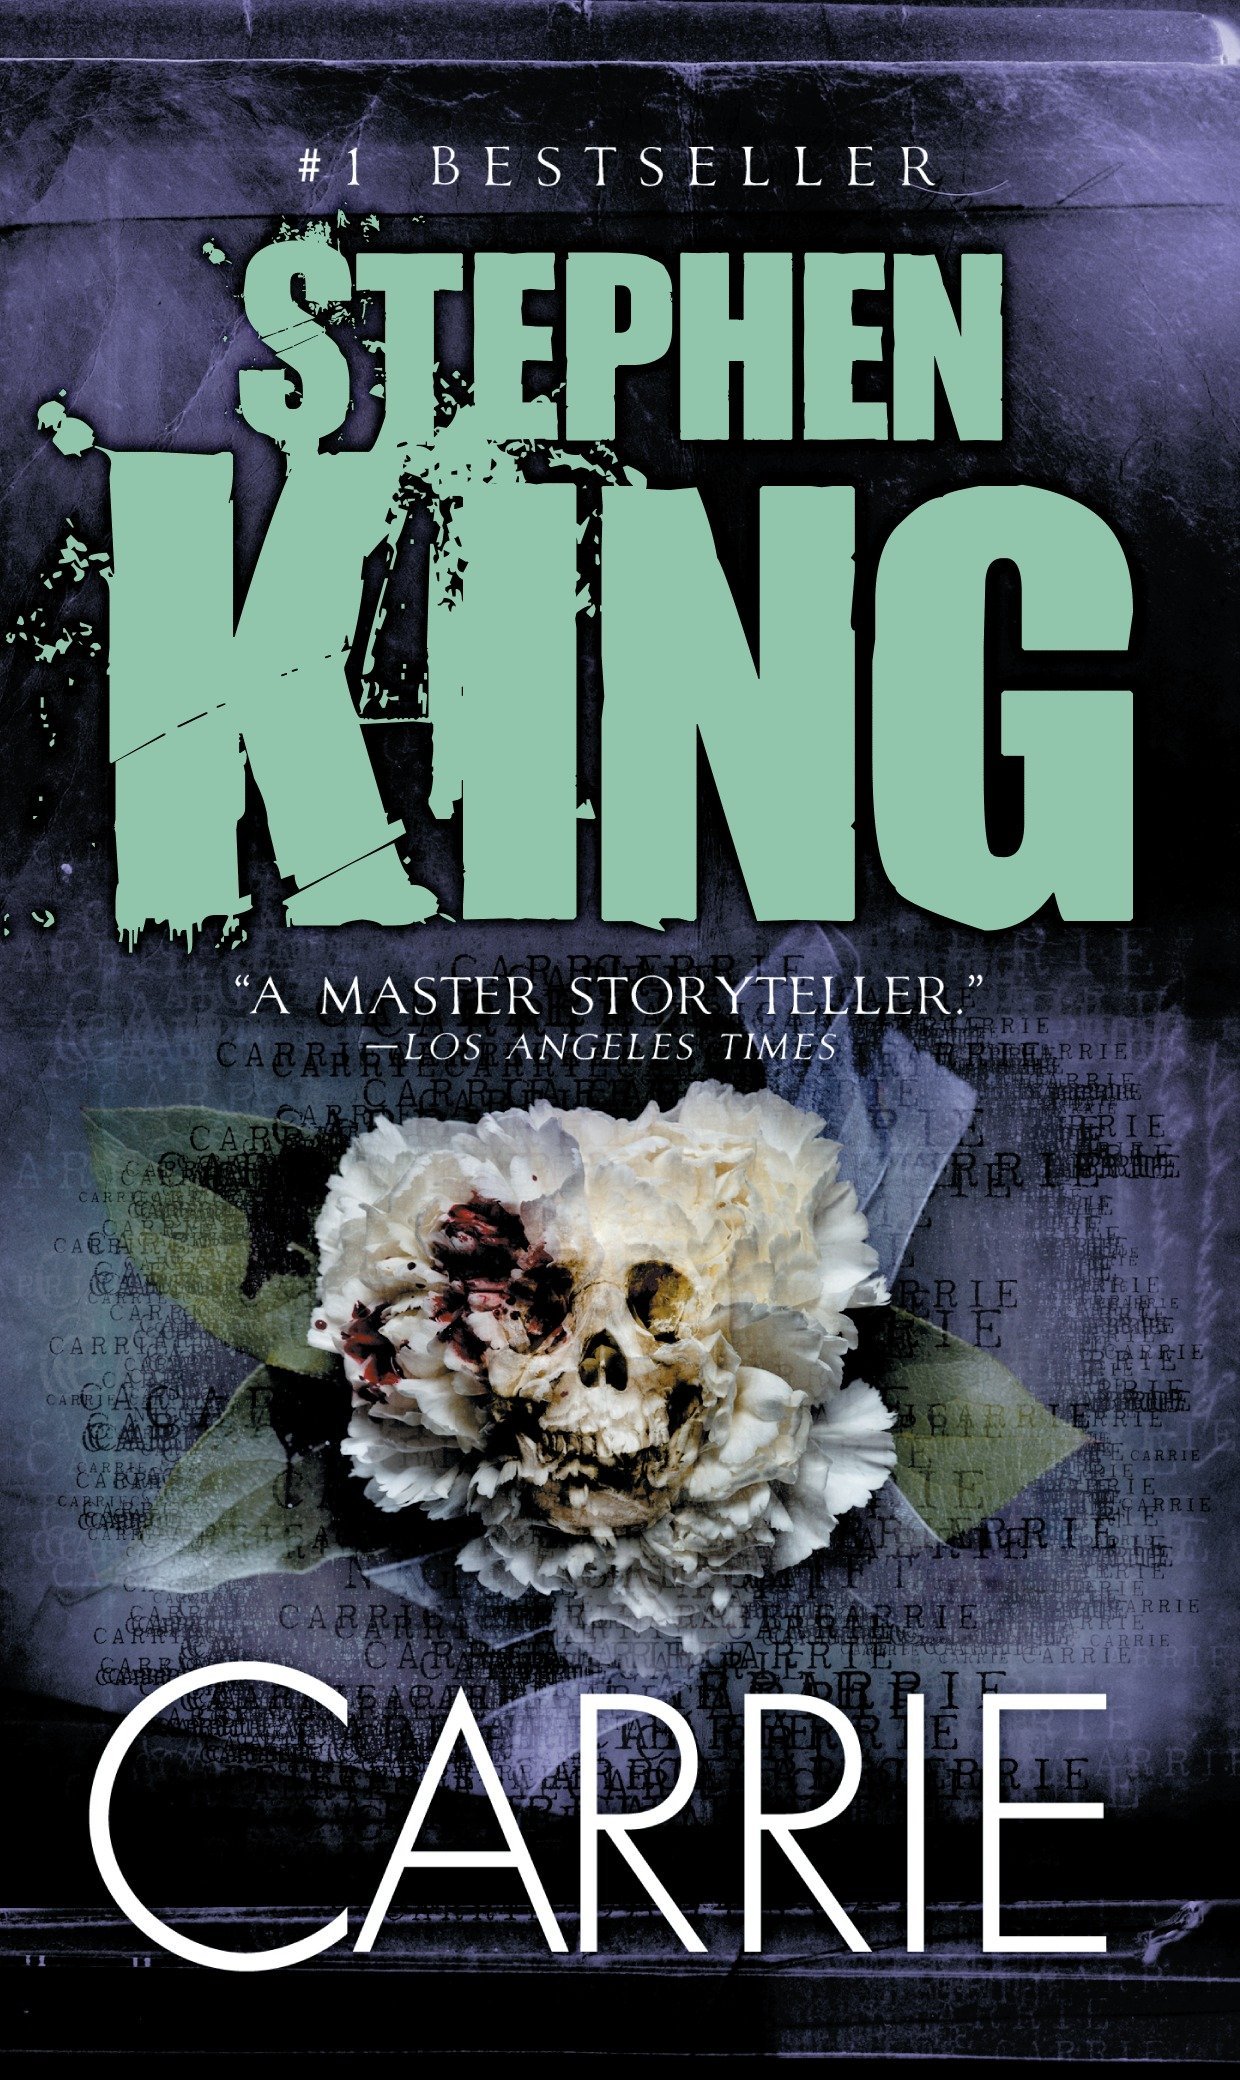 (PDF DOWNLOAD) Carrie by Stephen King